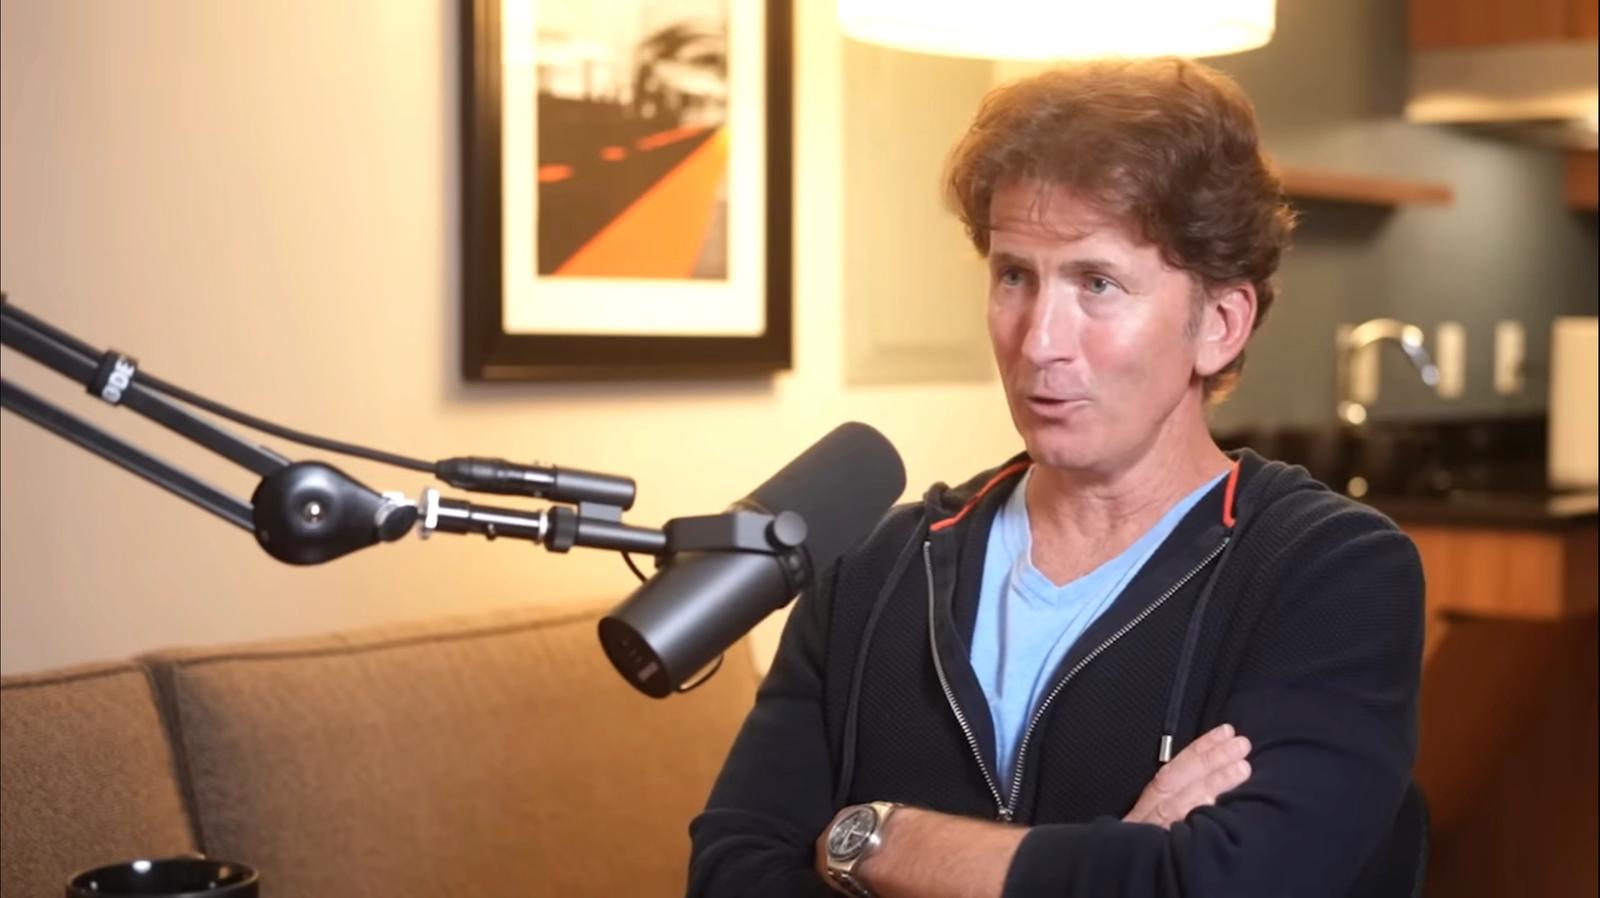 Todd Howard sits behind a microphone